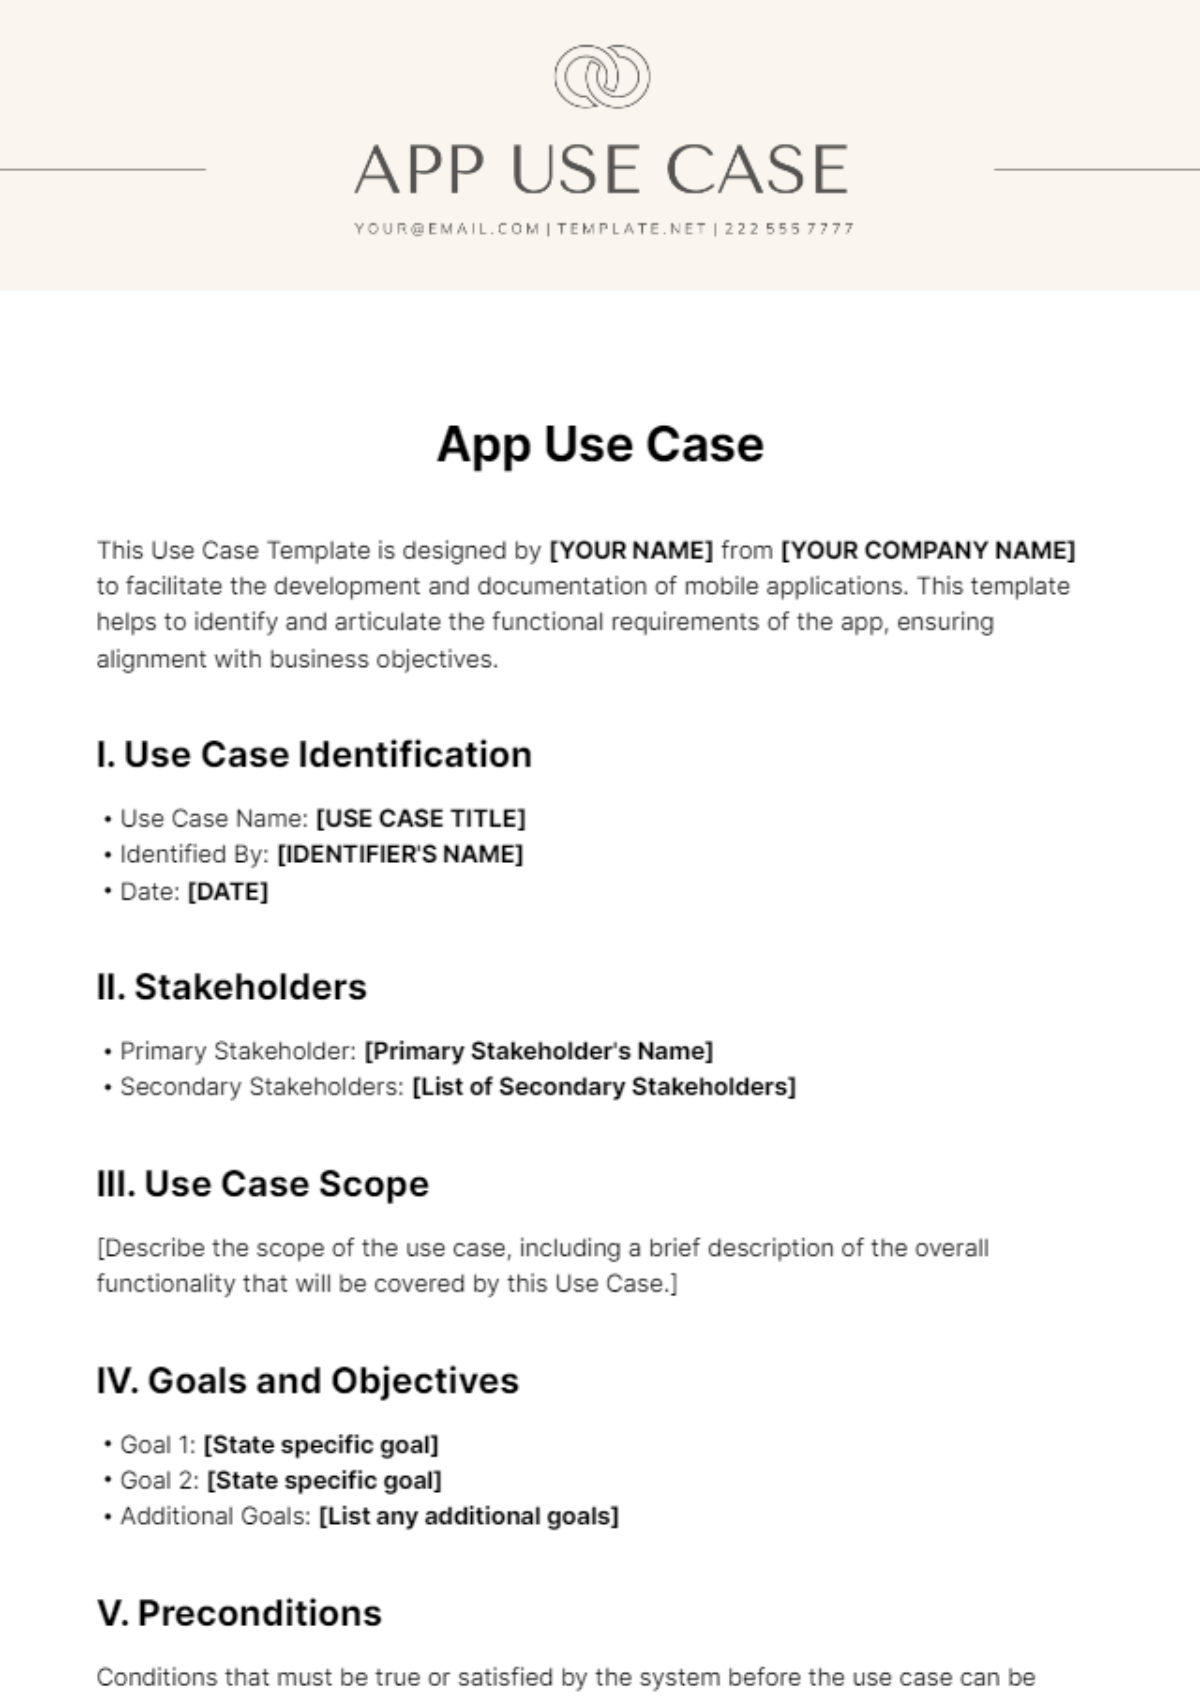 Free App Use Case Template